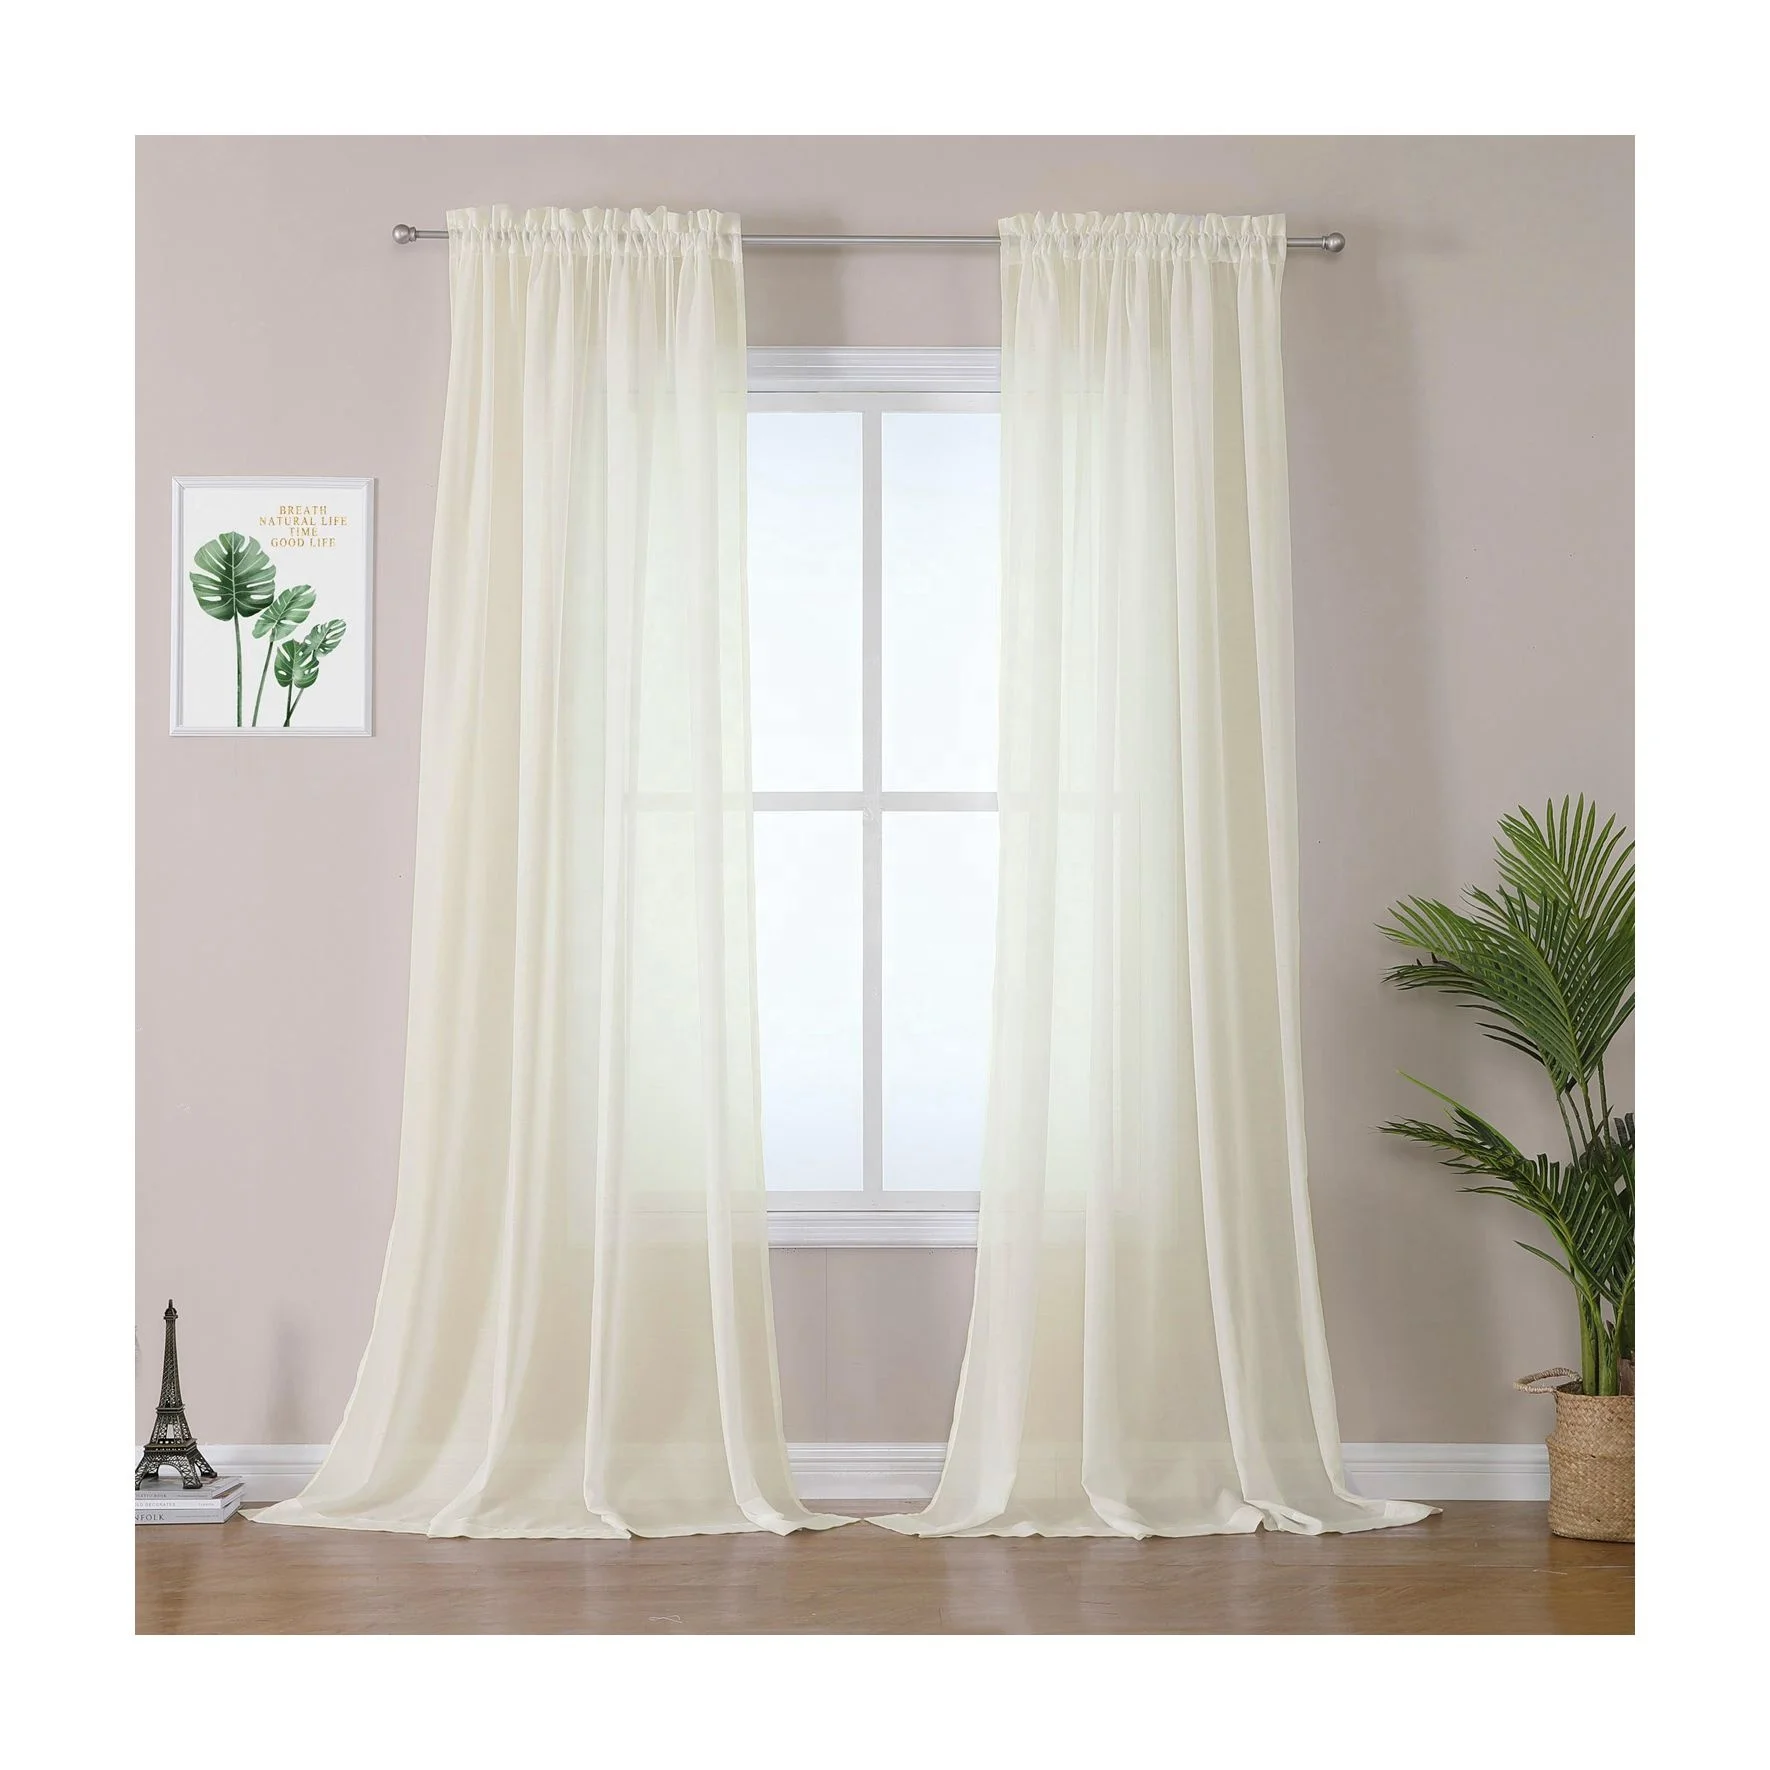 

Hot Sell New Good Quality Window Panel OWENIE Cheap Ready Made Turkish White Sheer Curtain for Living Room